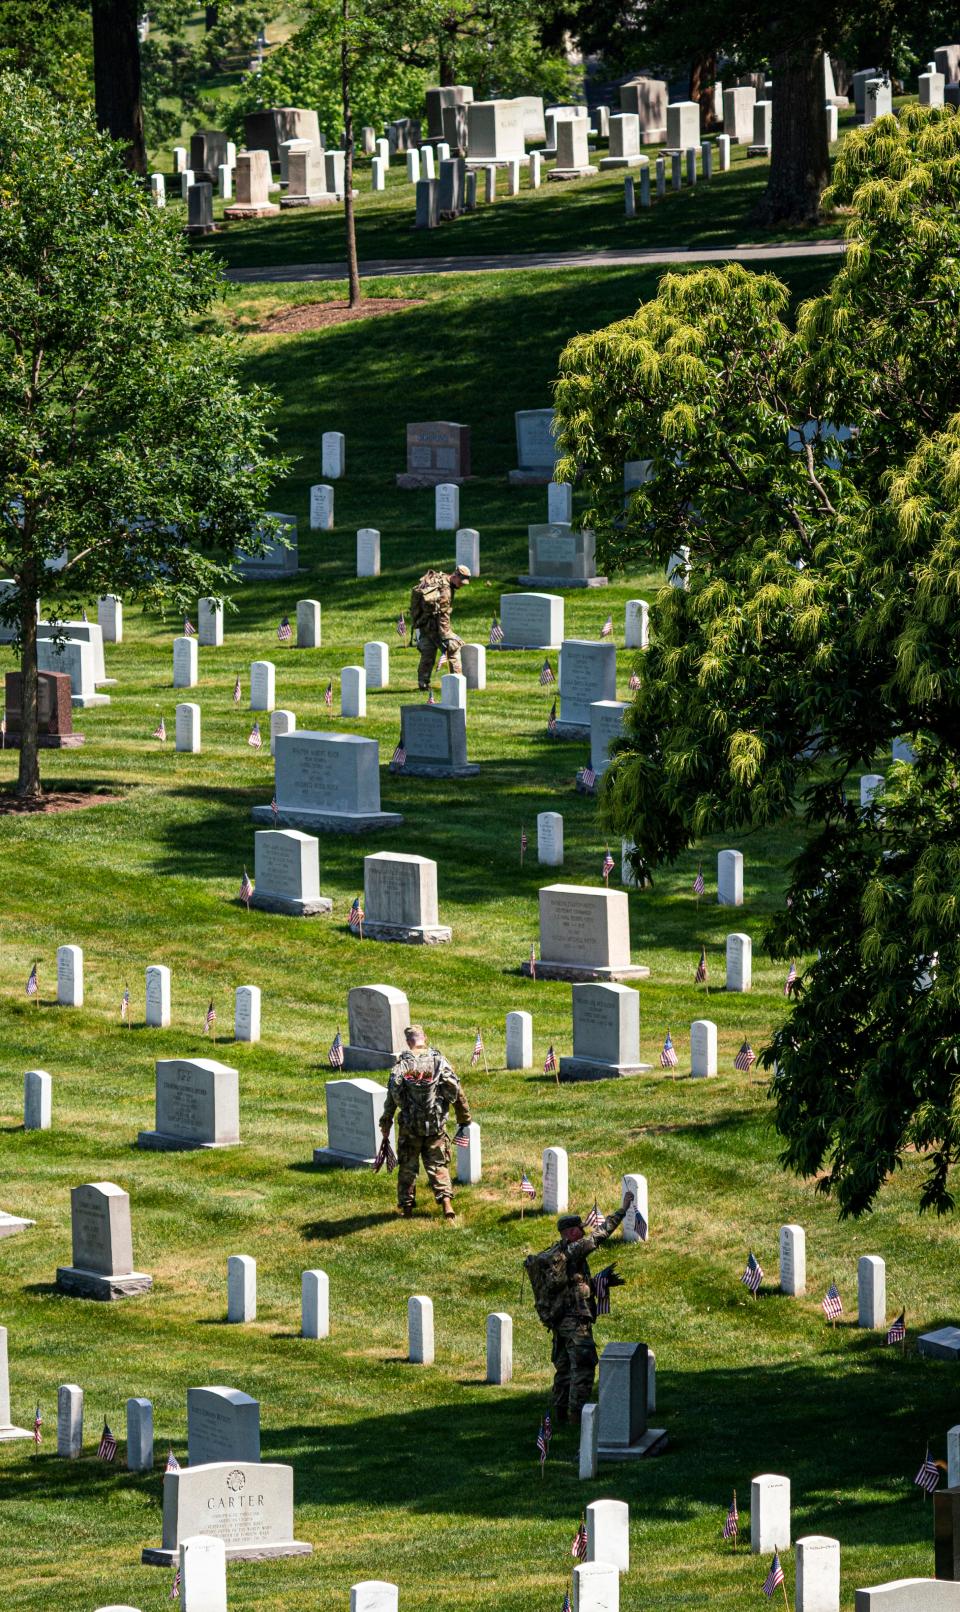 Members of the 3rd United States Infantry Regiment, also known as The Old Guard, place flags in front of each headstone as part of the "Flags In" ceremony at Arlington National Cemetery in Arlington, Va. on Thursday, May 27, 2021. Since 1948, The Old Guard has placed flags at each headstone in honor of Memorial Day.